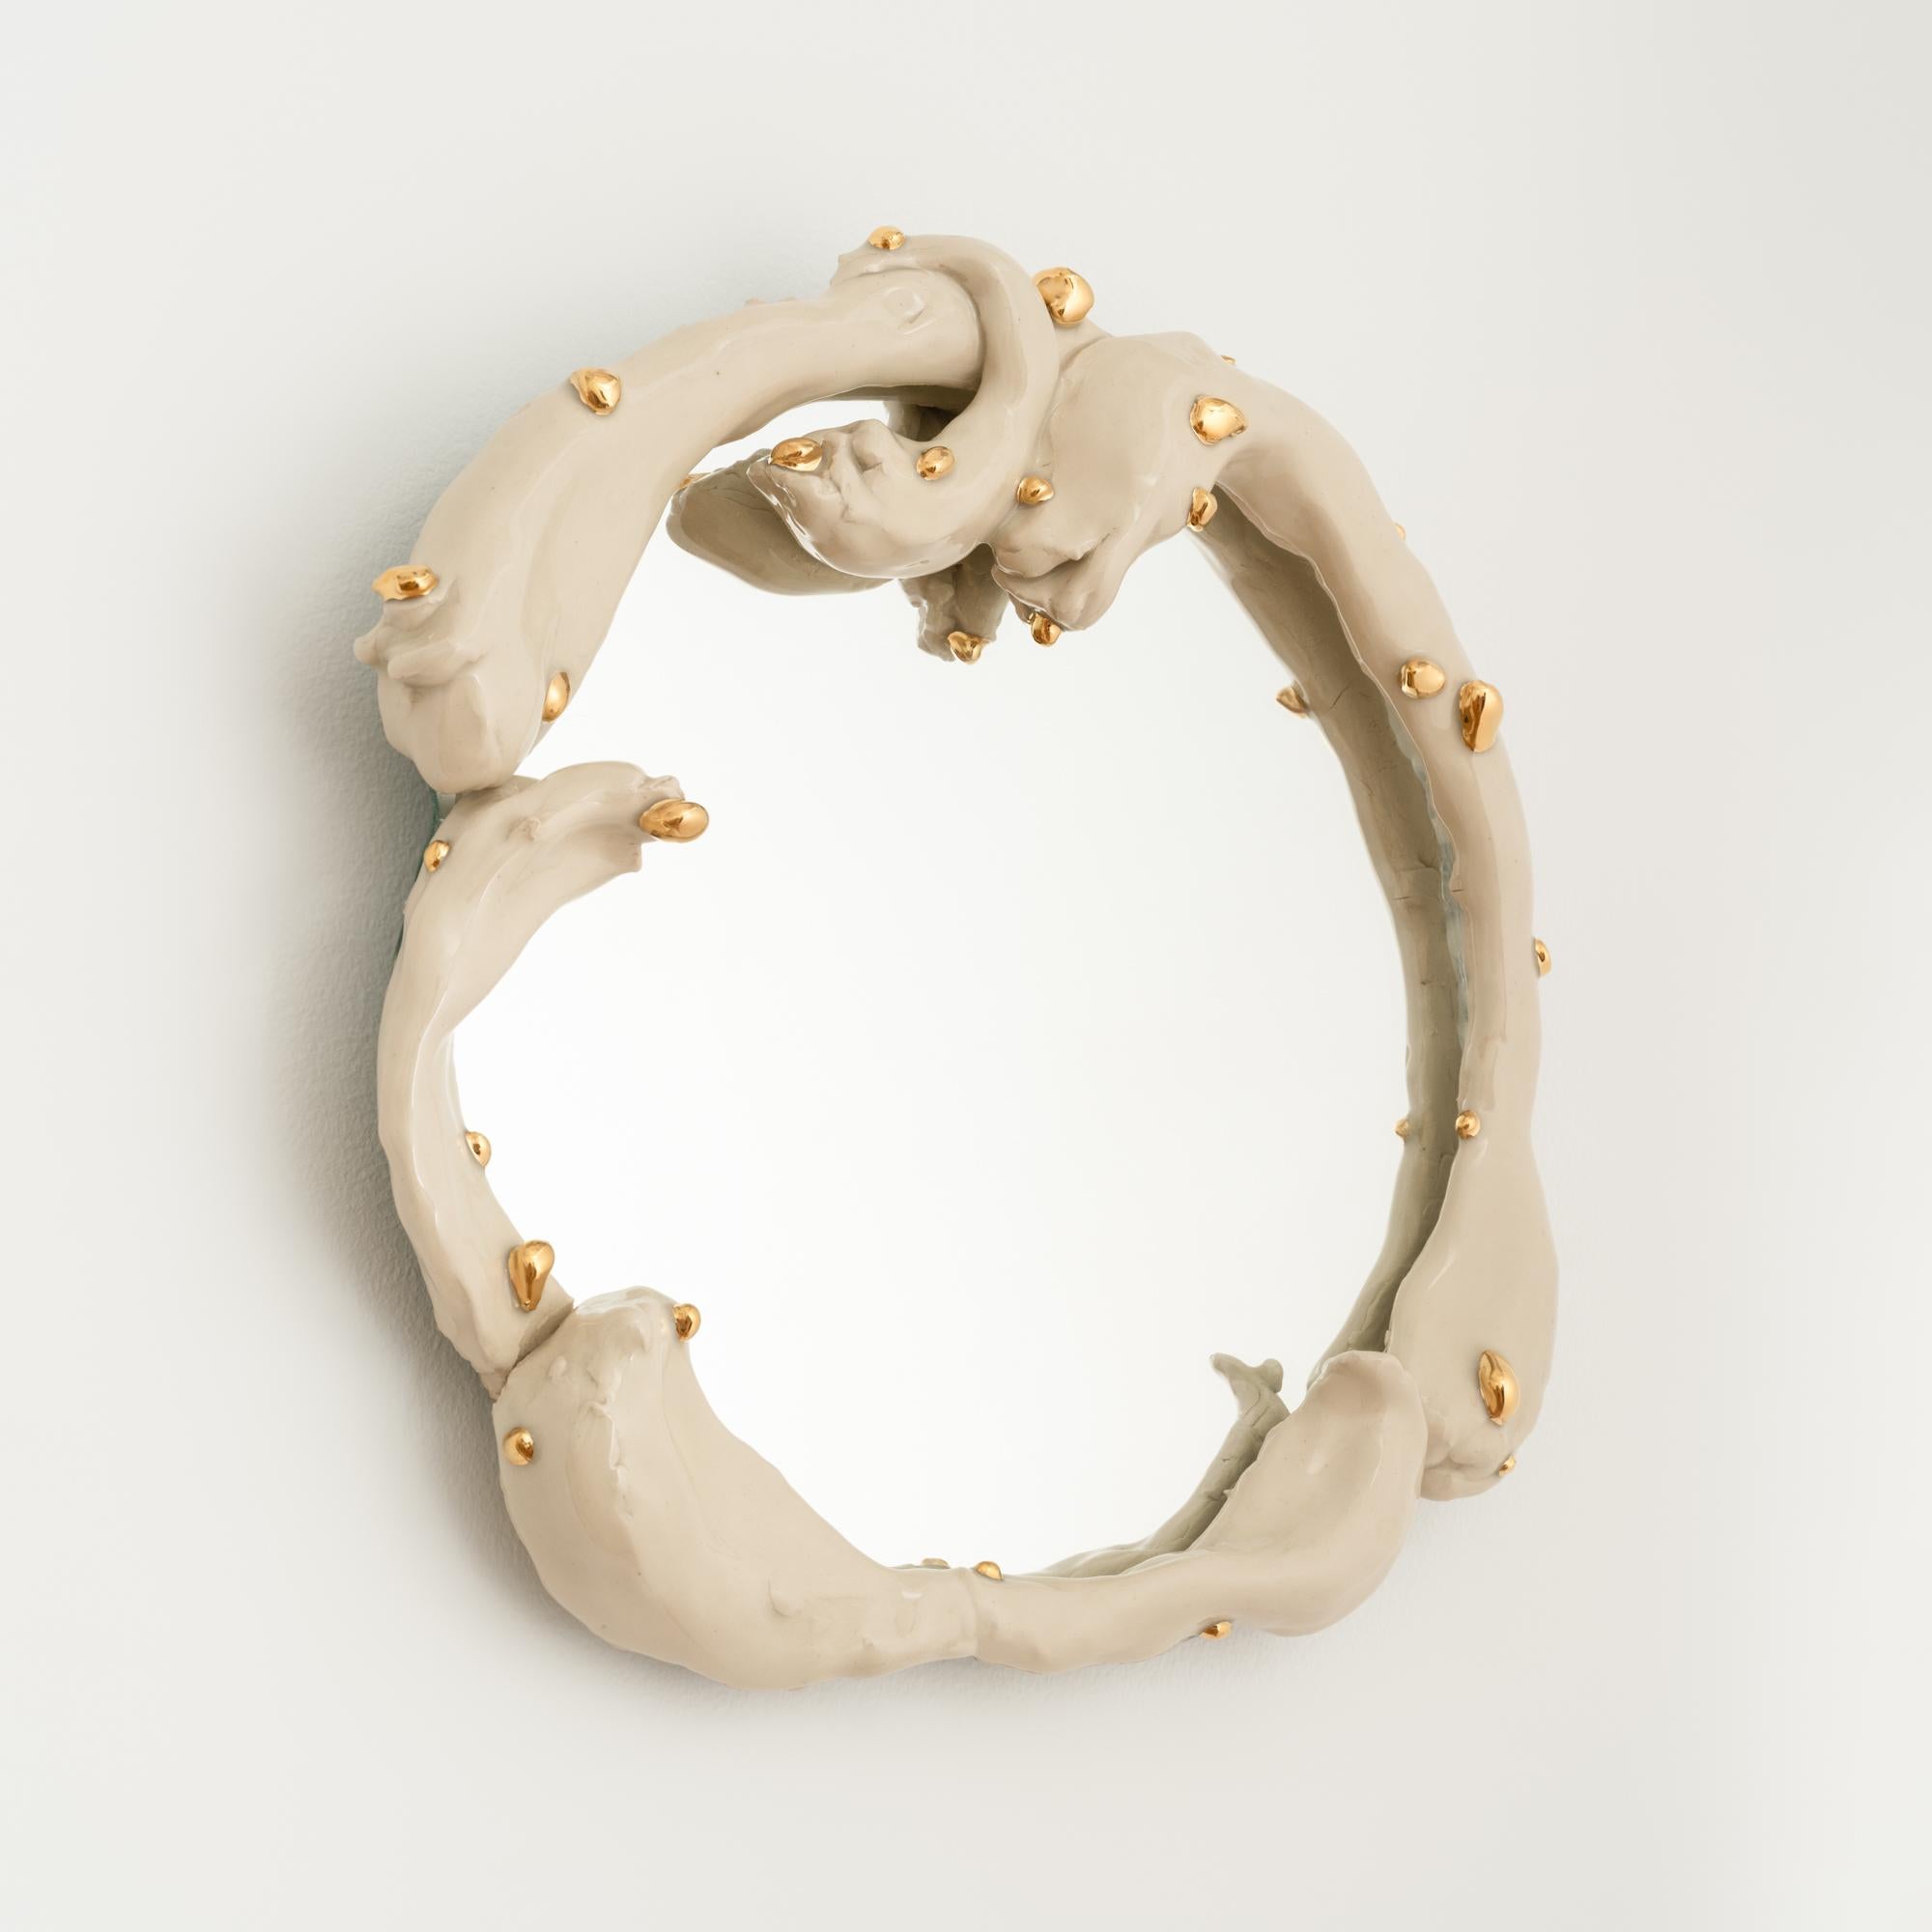 This one-of-a-kind wall circular mirror features a hand-built stoneware frame finished in a glossy cream-colored glaze and embellished with blob-like applications of 22k gold luster. 

Both functional and visually striking, this ornate and